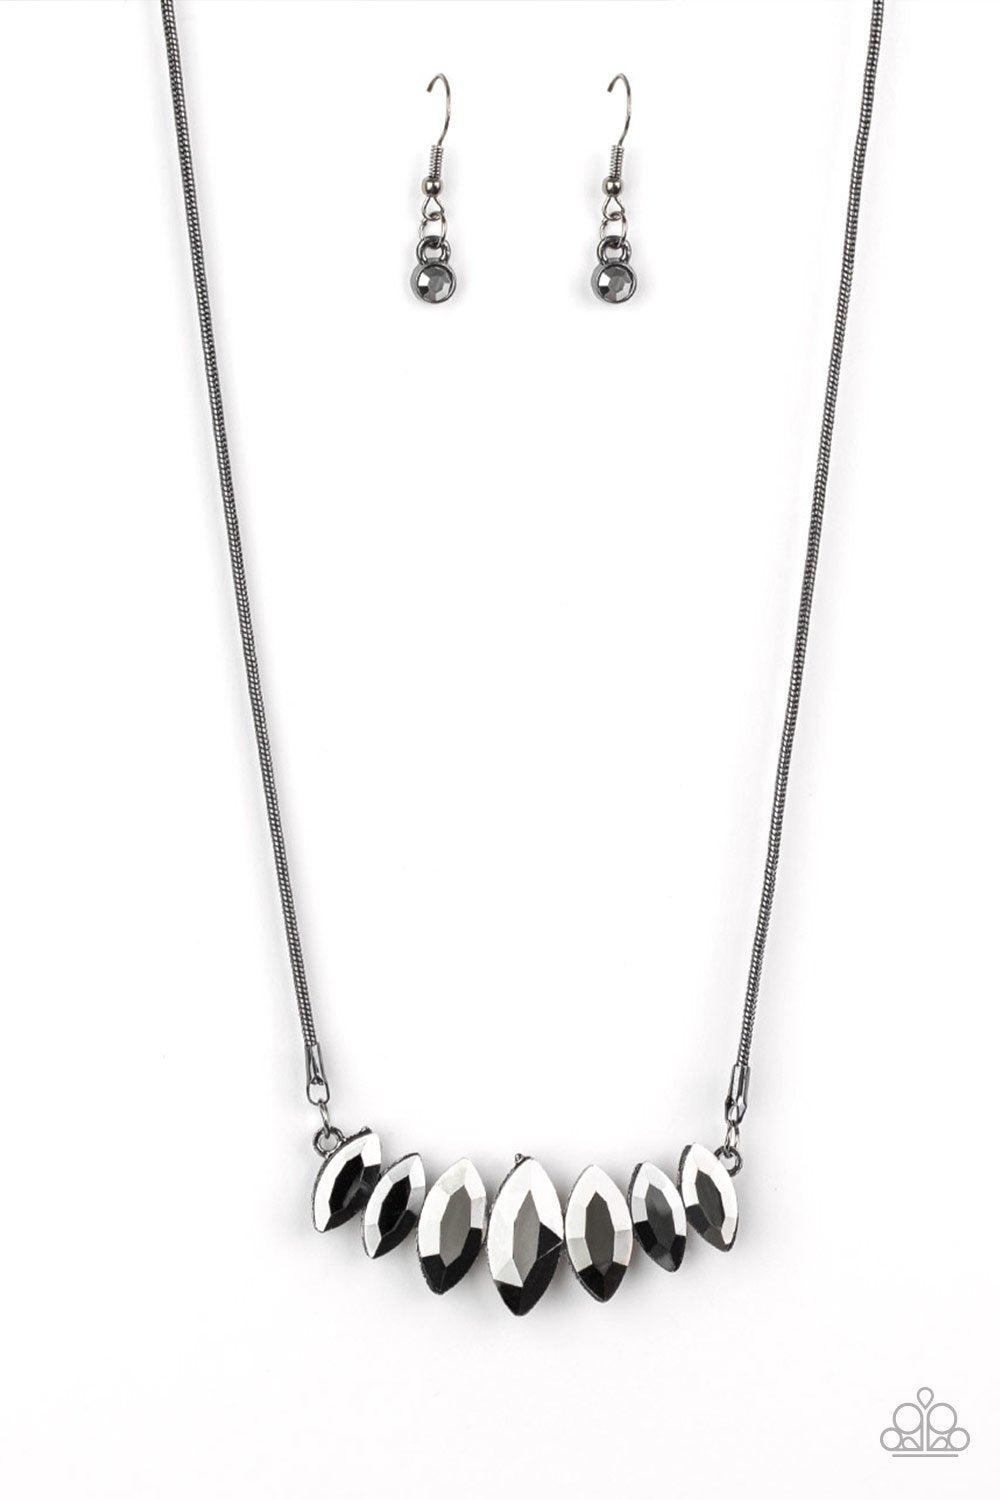 &lt;p&gt;Gradually increasing in size near the center, glittery hematite marquise shaped gems link below the collar for a dramatic look. Features an adjustable clasp closure.&lt;/p&gt;

&lt;p&gt;&lt;i&gt; Sold as one individual necklace.  Includes one pair of matching earrings.
&lt;/i&gt;&lt;/p&gt;

&lt;imgsrc alt=\&quot;New Kit\&quot; align=\&quot;middle\&quot; height=\&quot;50\&quot; width=\&quot;50\&quot;&gt;&lt;/imgsrc&gt;